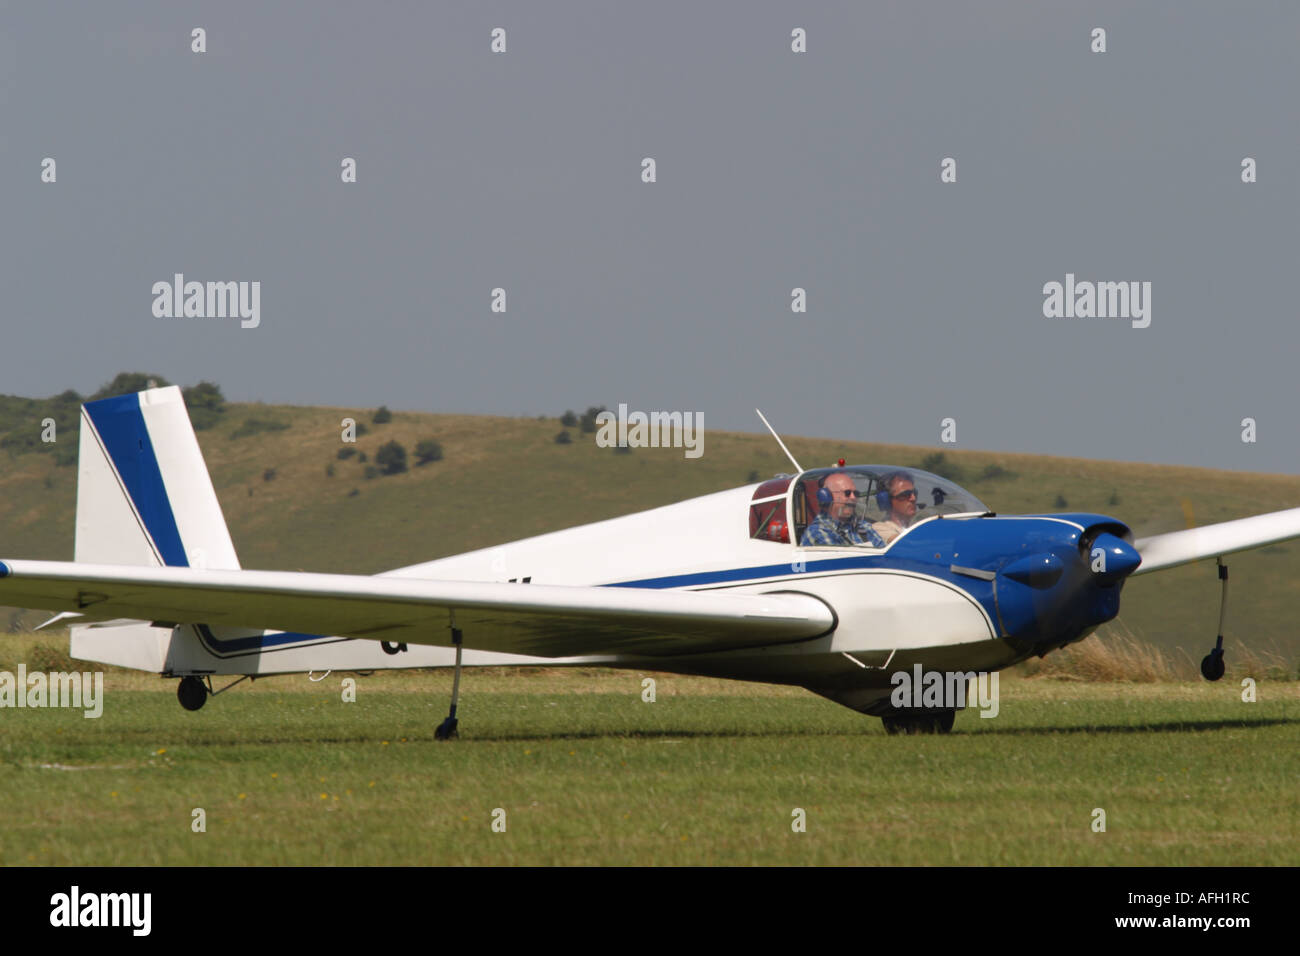 Slingsby T61 Venture motor glider taking off from a grass airfield Stock Photo